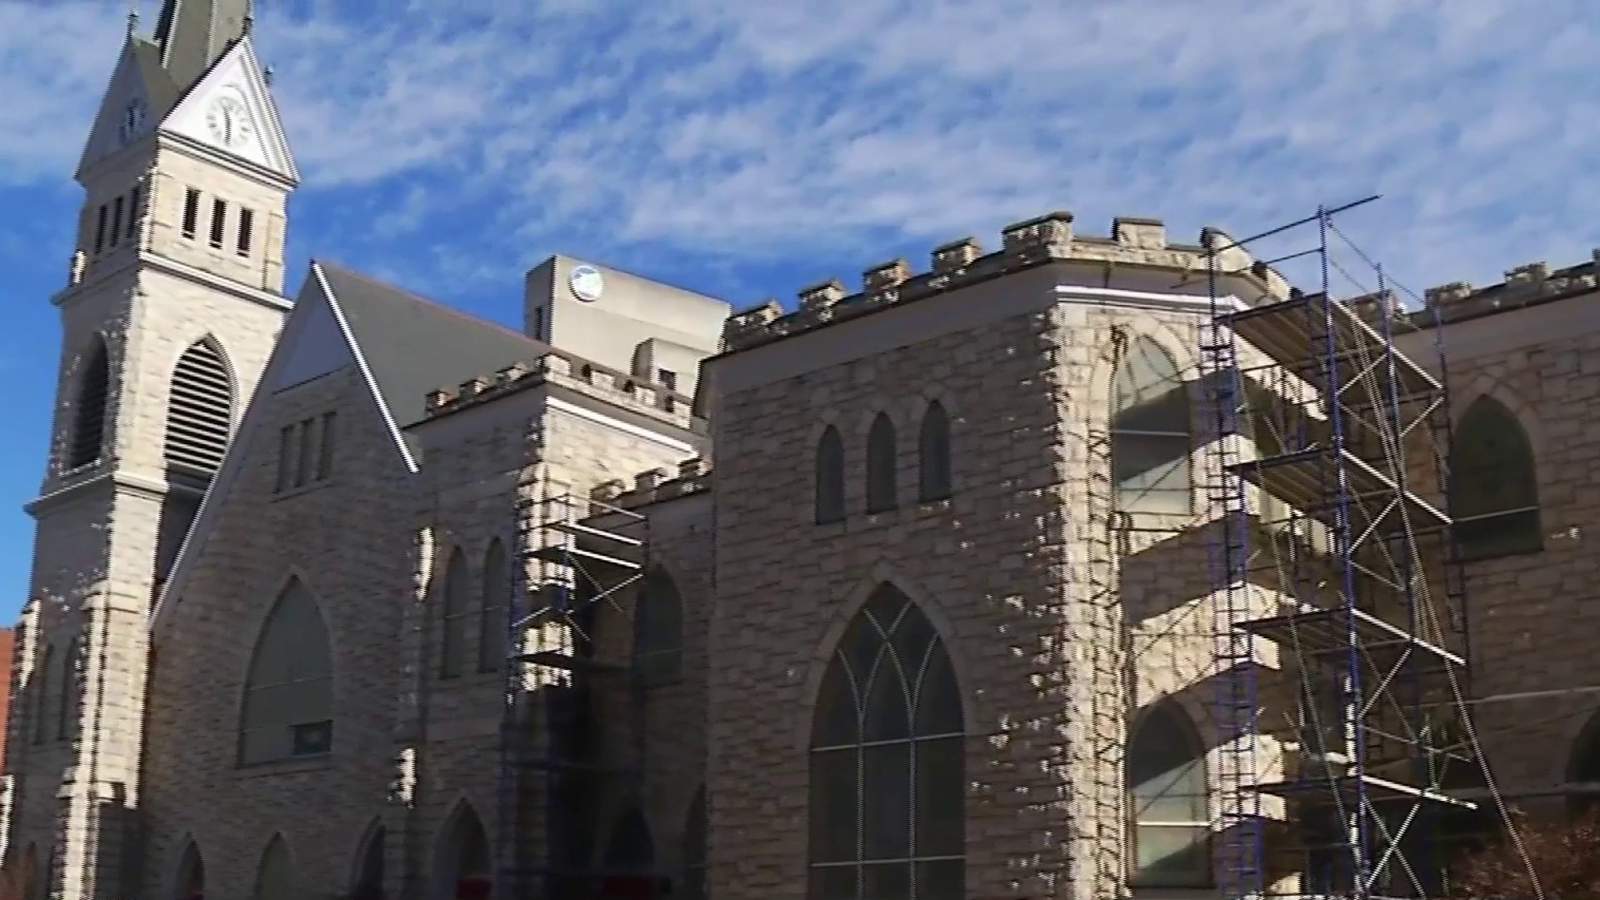 Historic Roanoke church reopens sanctuary after eight months of repairs